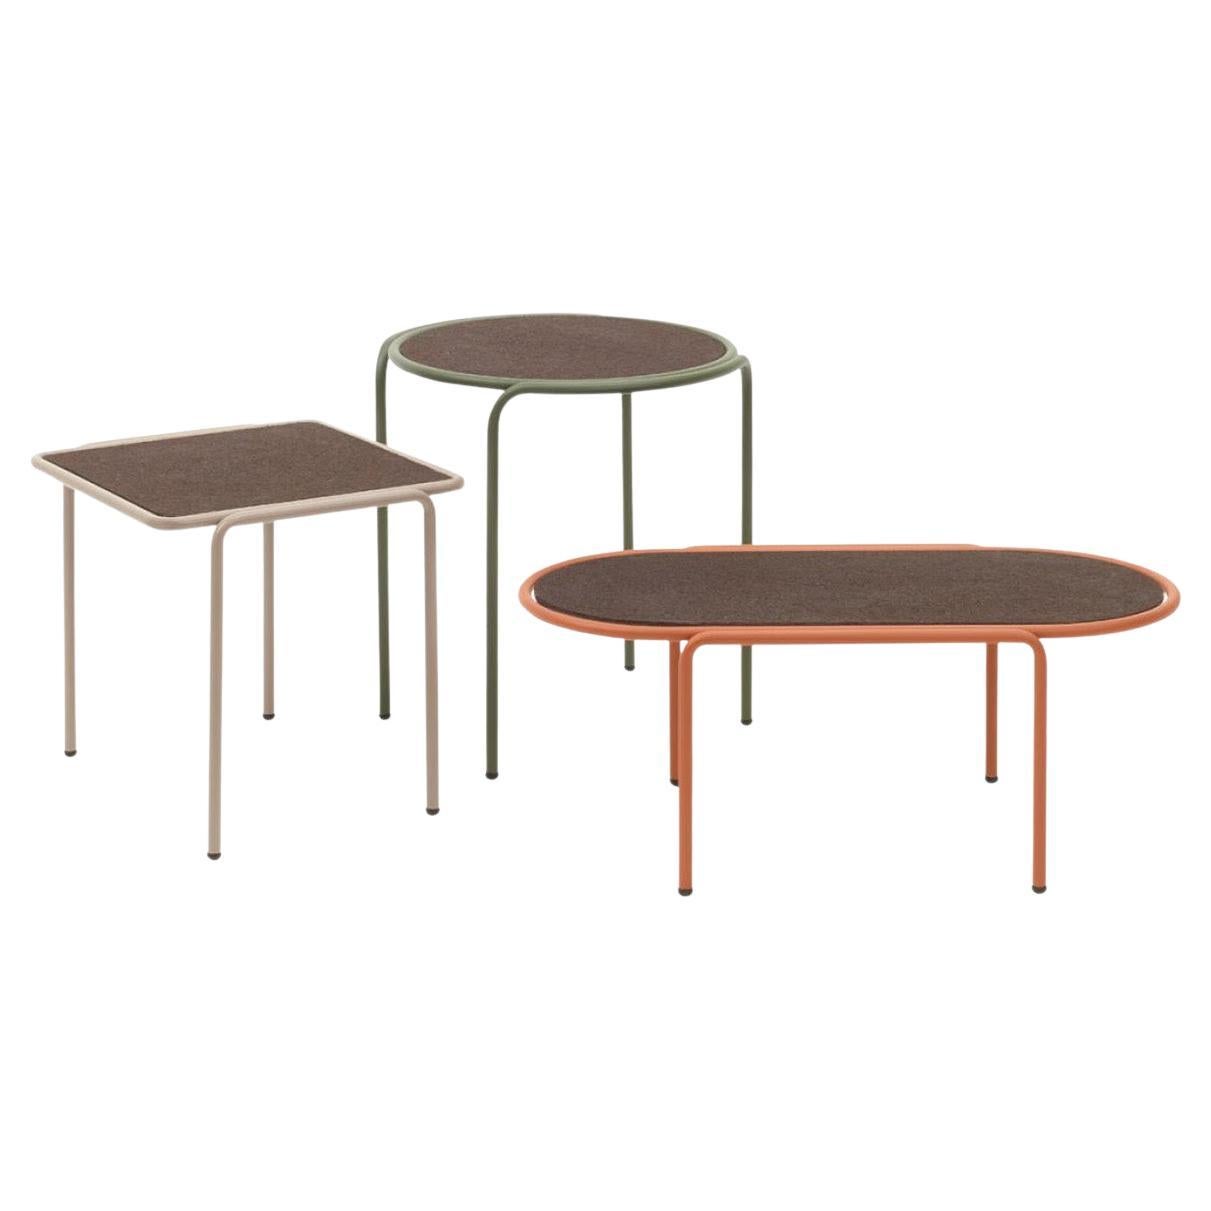 Three "Geometry" Design Tables with Cork Tops, Indoor, Outdoor For Sale